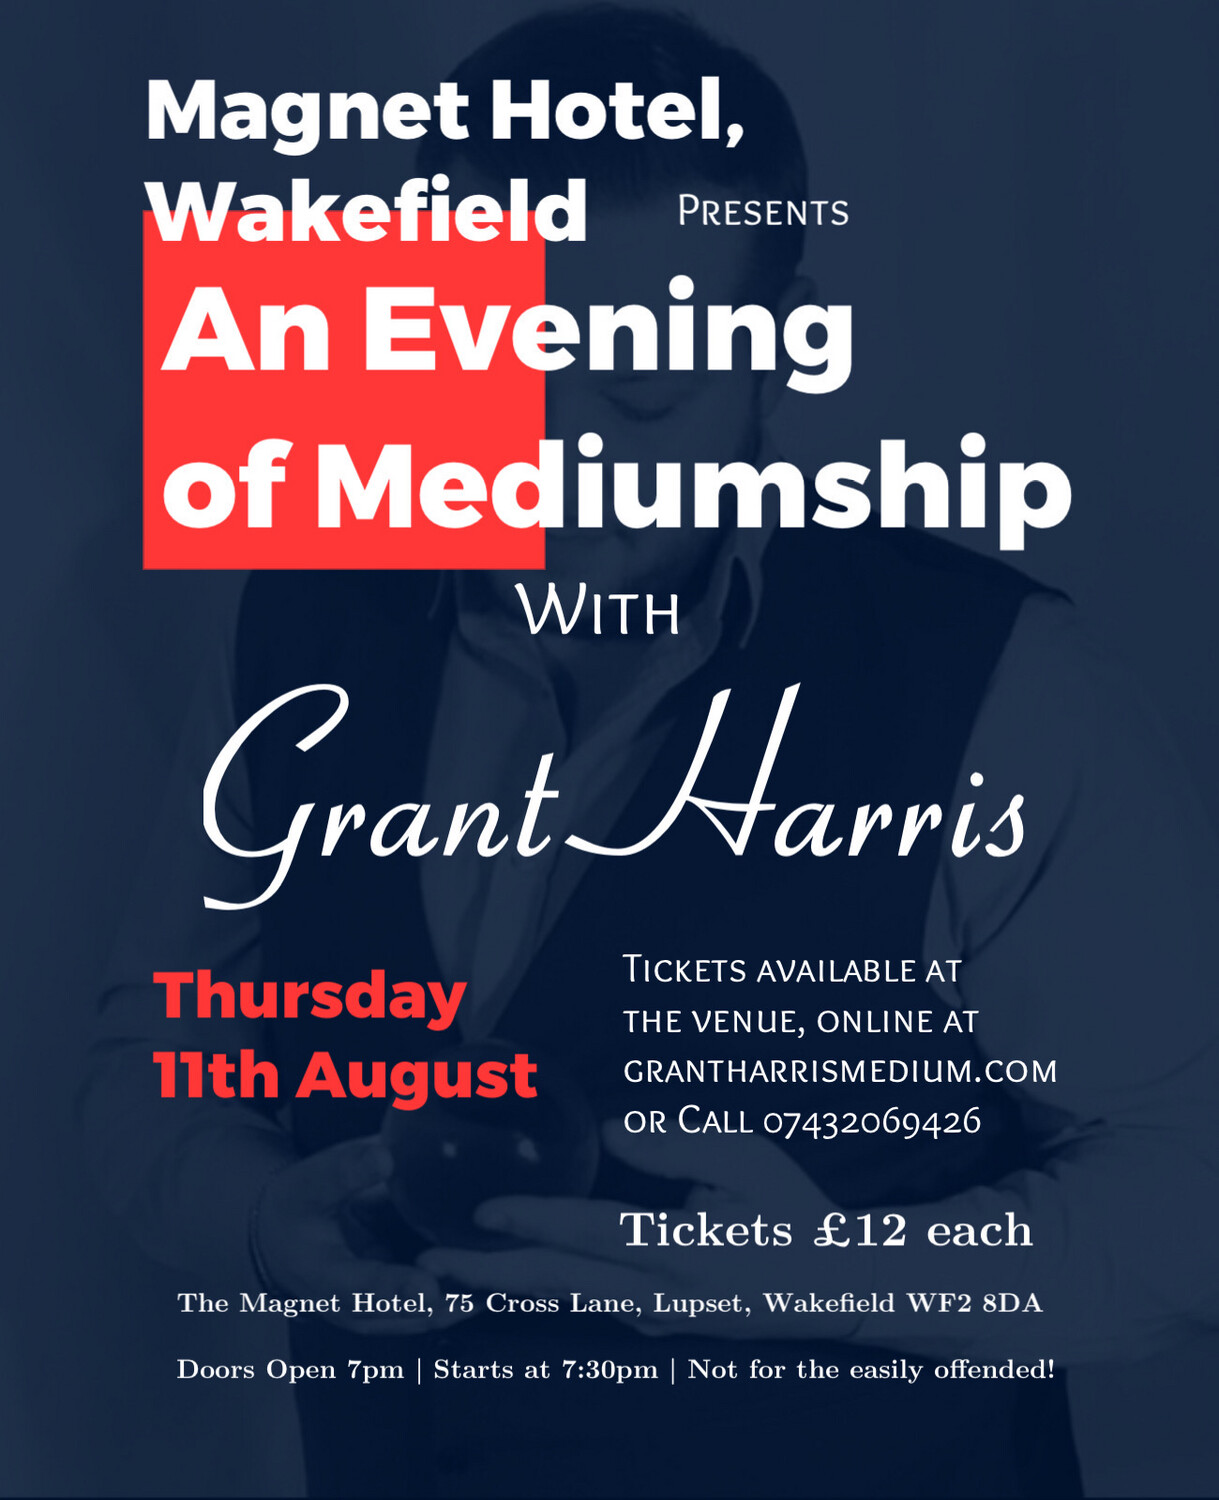 Evening of Mediumship, Magnet Hotel, Wakefield, Thu 11th August 2022